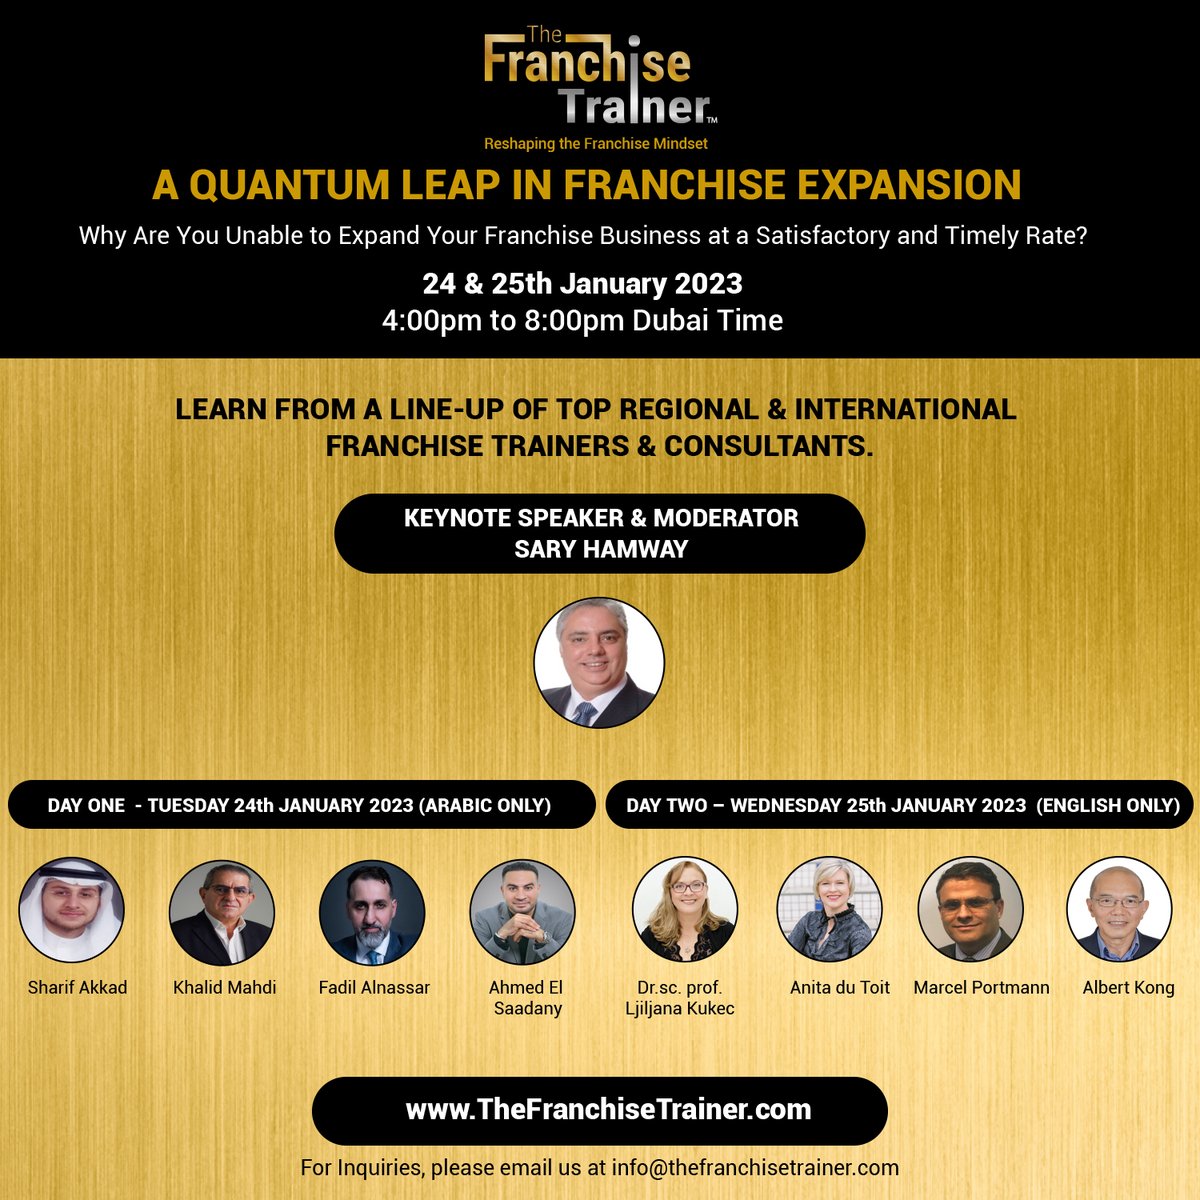 thefranchisetrainer.com/newsletter/qua…
A Quantum Leap in Franchise Expansion - Live Webinar
24 & 25th January 2023
4:00pm to 8:00pm Dubai Time
For corporate and group discounts: info@thefranchisetrainer.com
thefranchisetrainer.com
#FranchiseTraining #franchiseworkshop